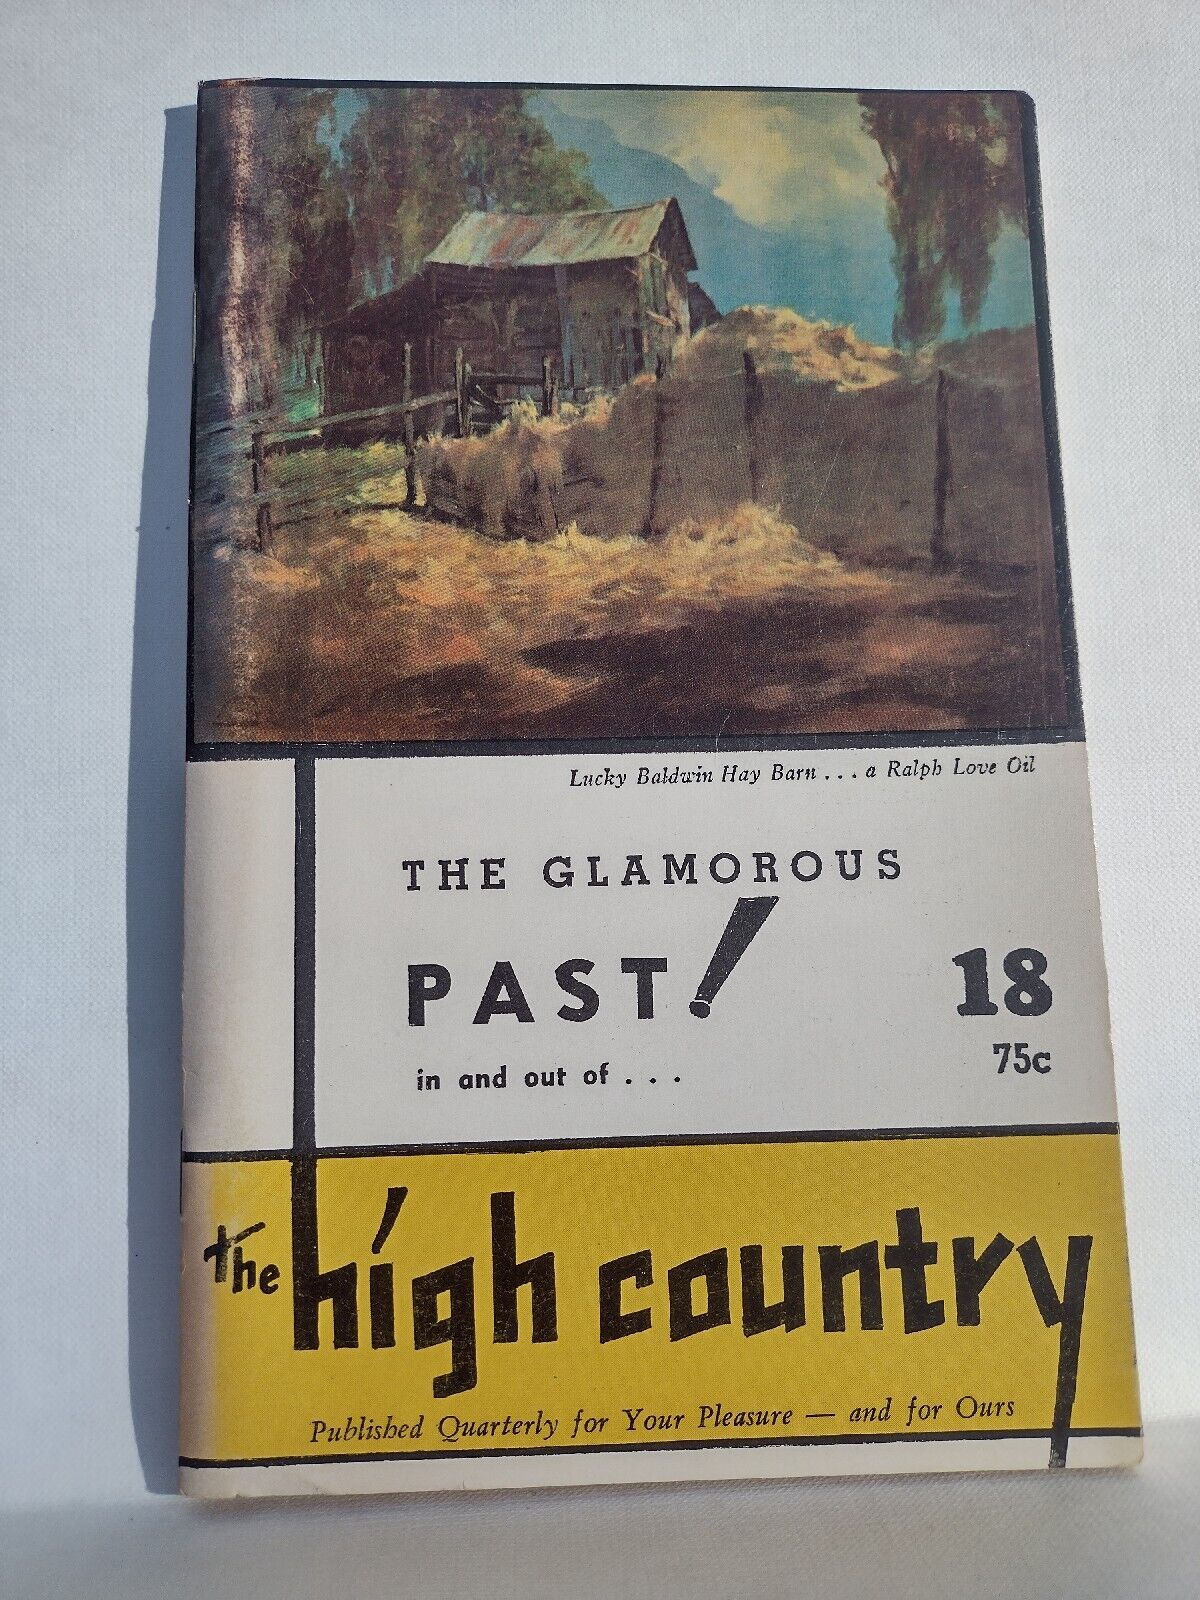 THE HIGH COUNTRY NO. 18, Autumn 1971 -Cox, Hicks, Hudson, and Love -Paperback